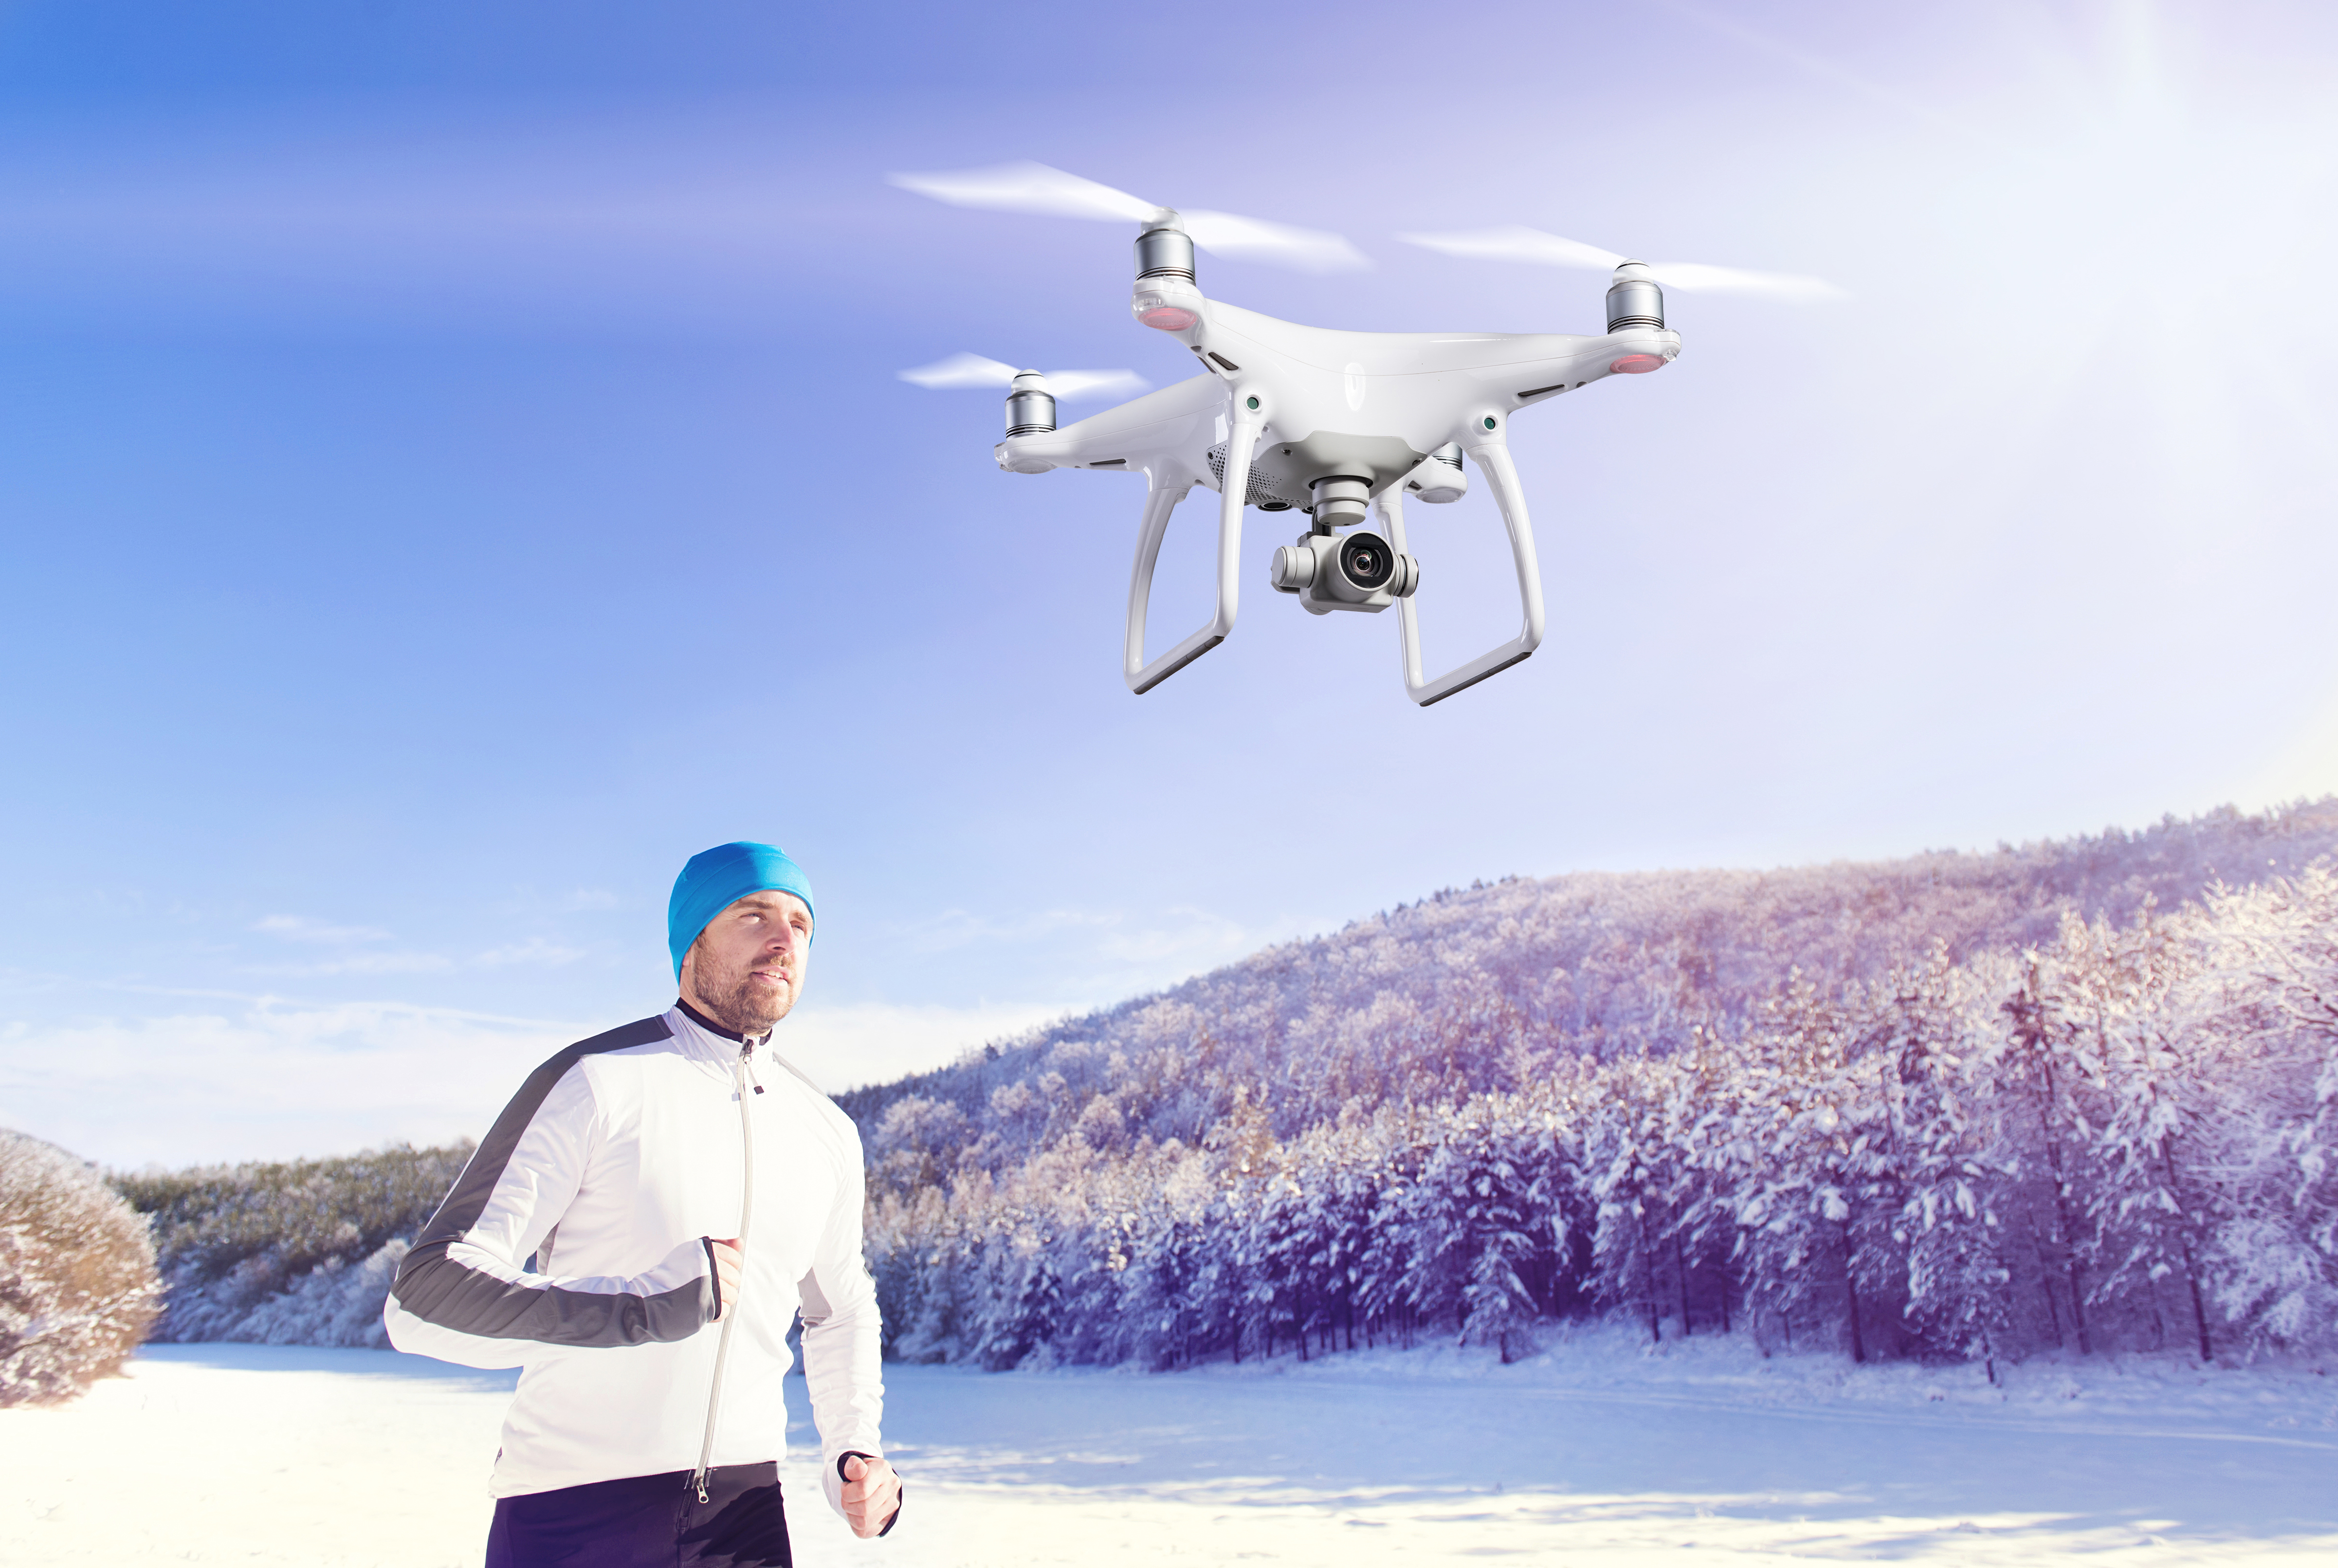 Showing cold weather drone flying